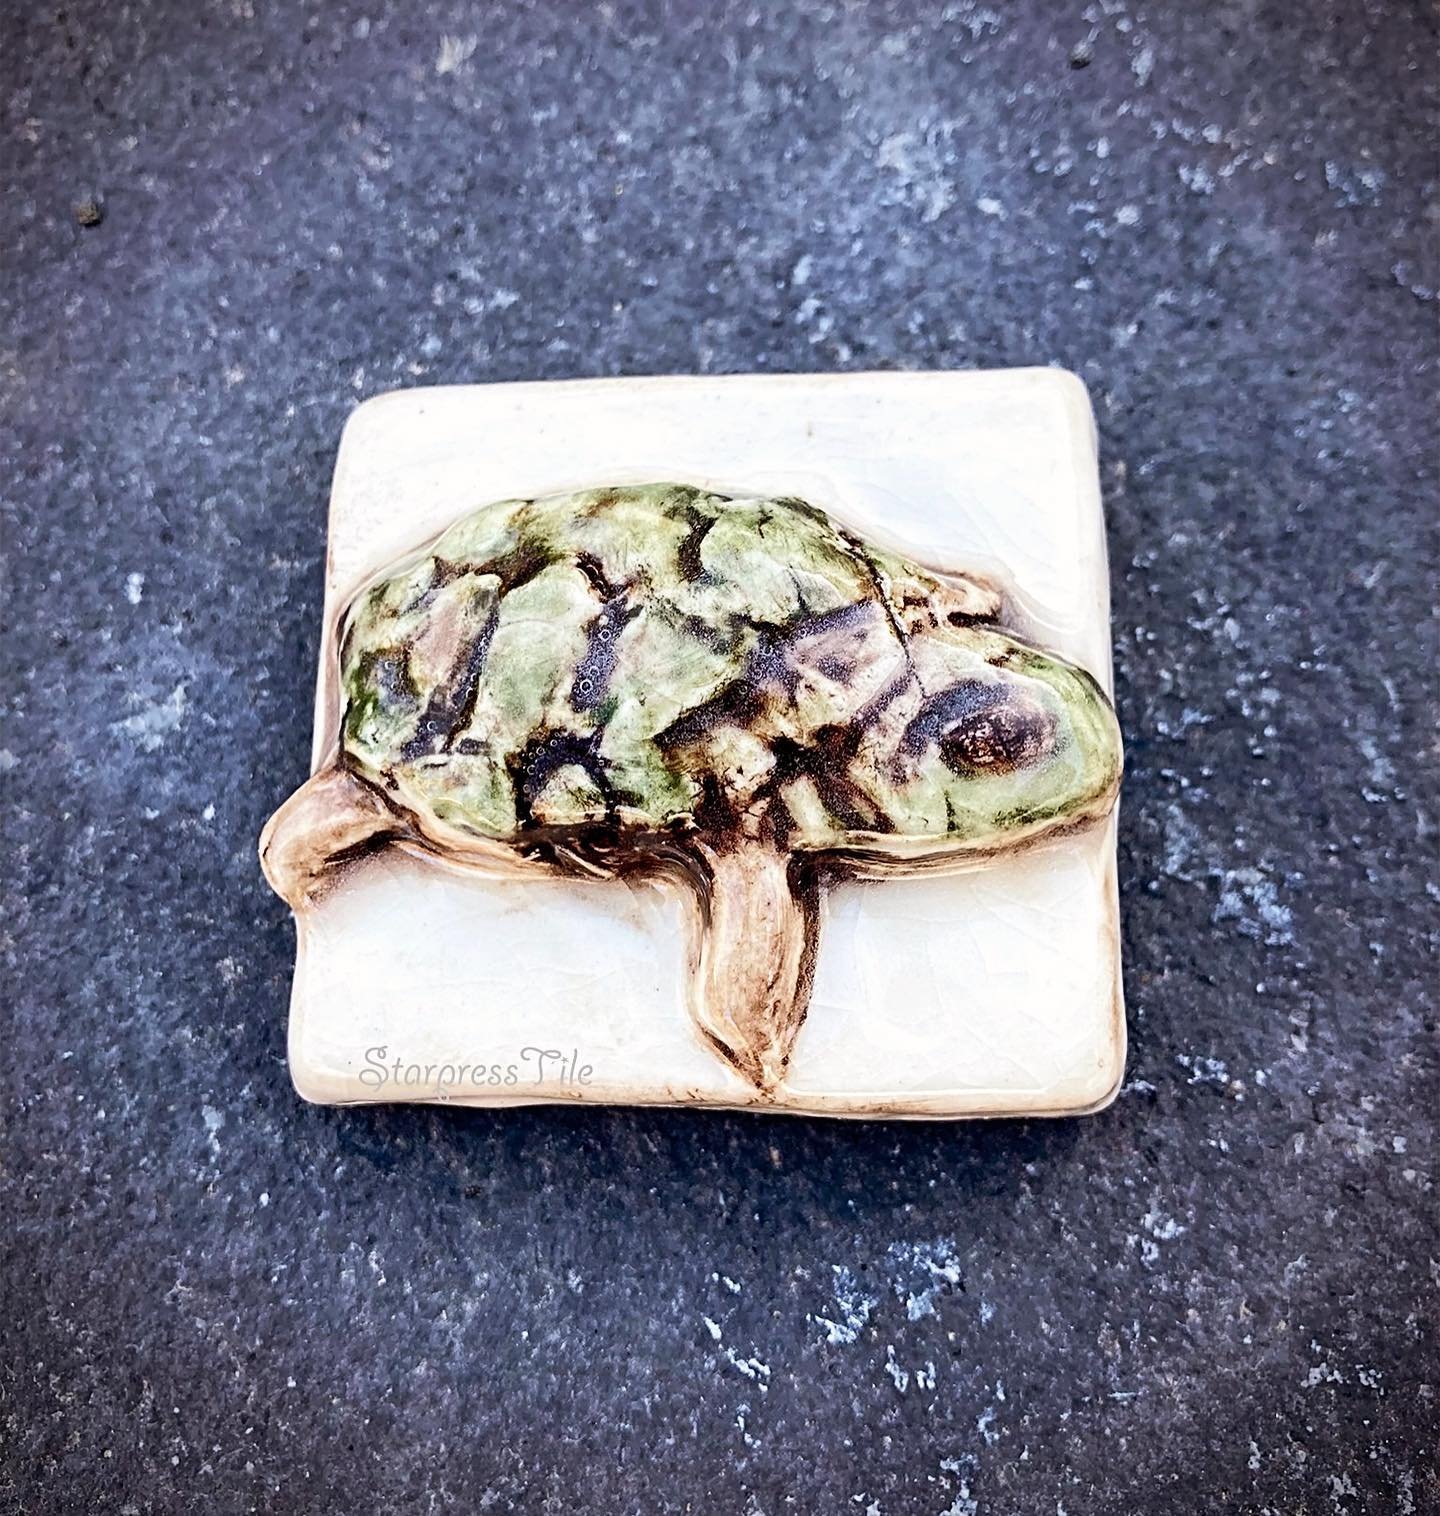 A little turtle for those of us needing slow and steadiness.🐢.
.
.
.
.
.
.
.
.
#slow #turtleart #ceramictile #relieftile #handpaintedtile #madeincolorado #coloradoartist #handmadetile #natureart #2x2 #inspiredbynature #turtleart #turtleartwork #turt